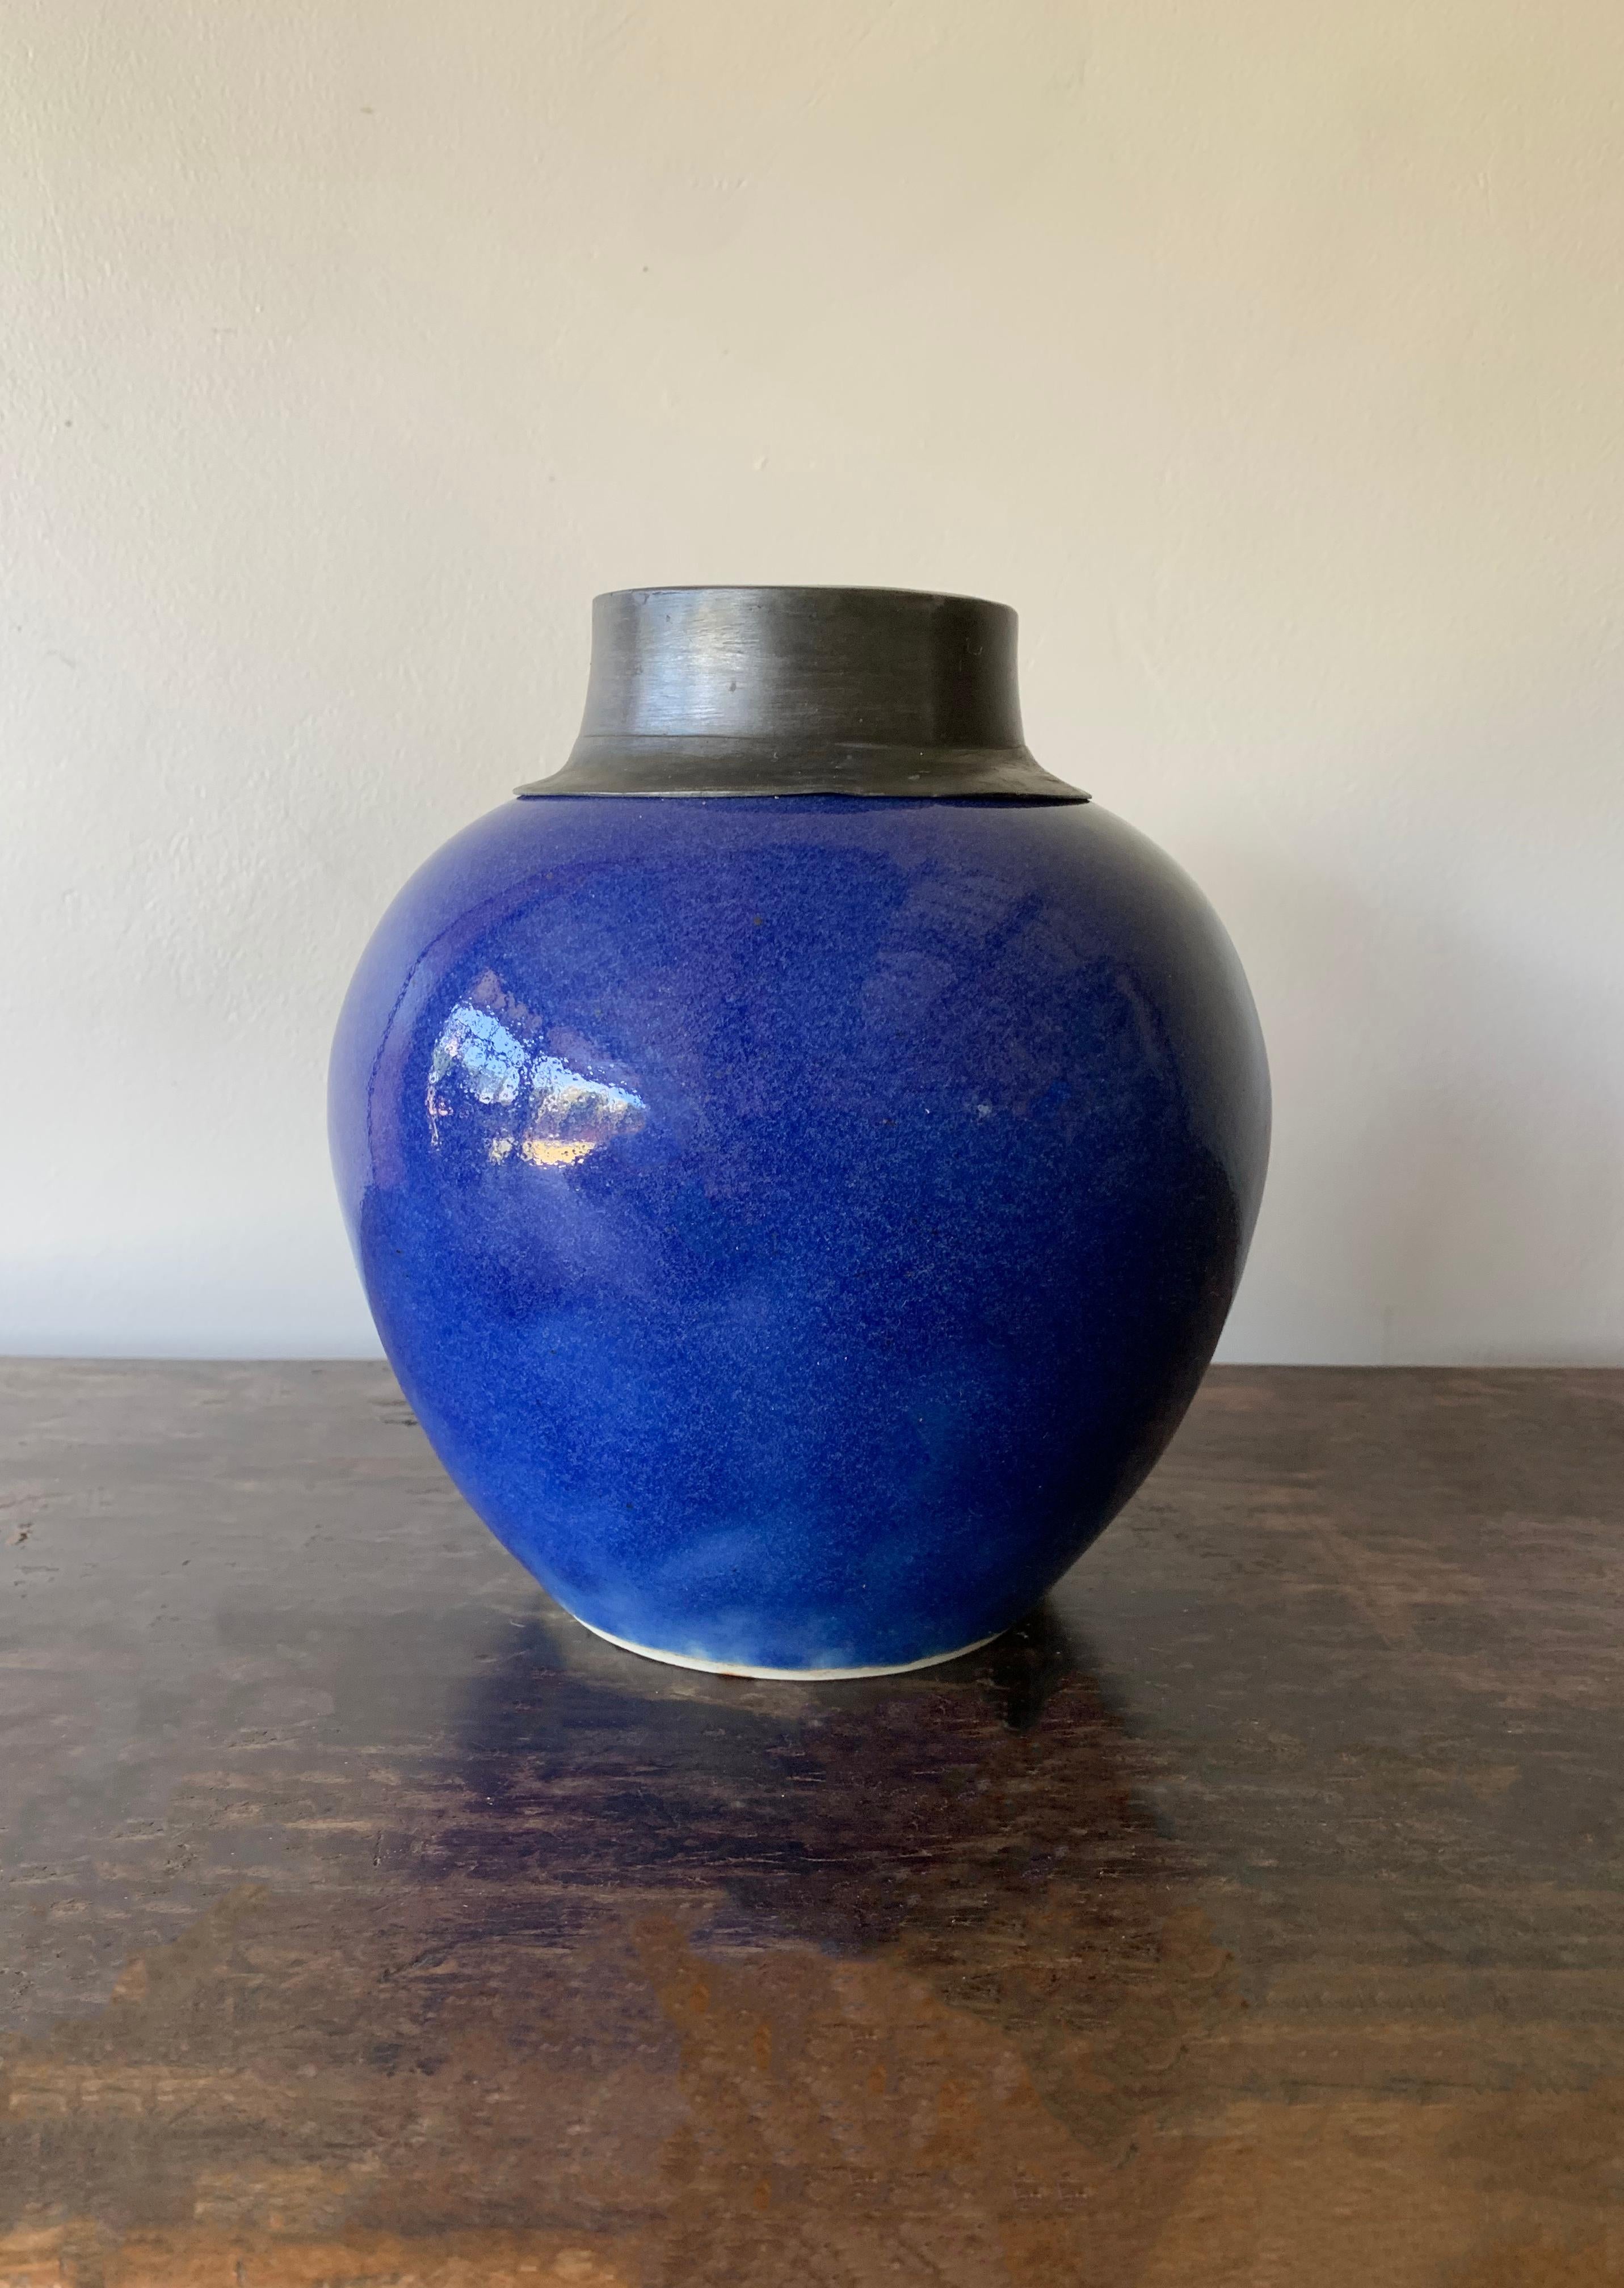 This is a Blue Chinese ceramic ginger jar with metal top dating to the Early 20th Century 

Dimensions: Height 20.5cm Diameter 18cm.
 